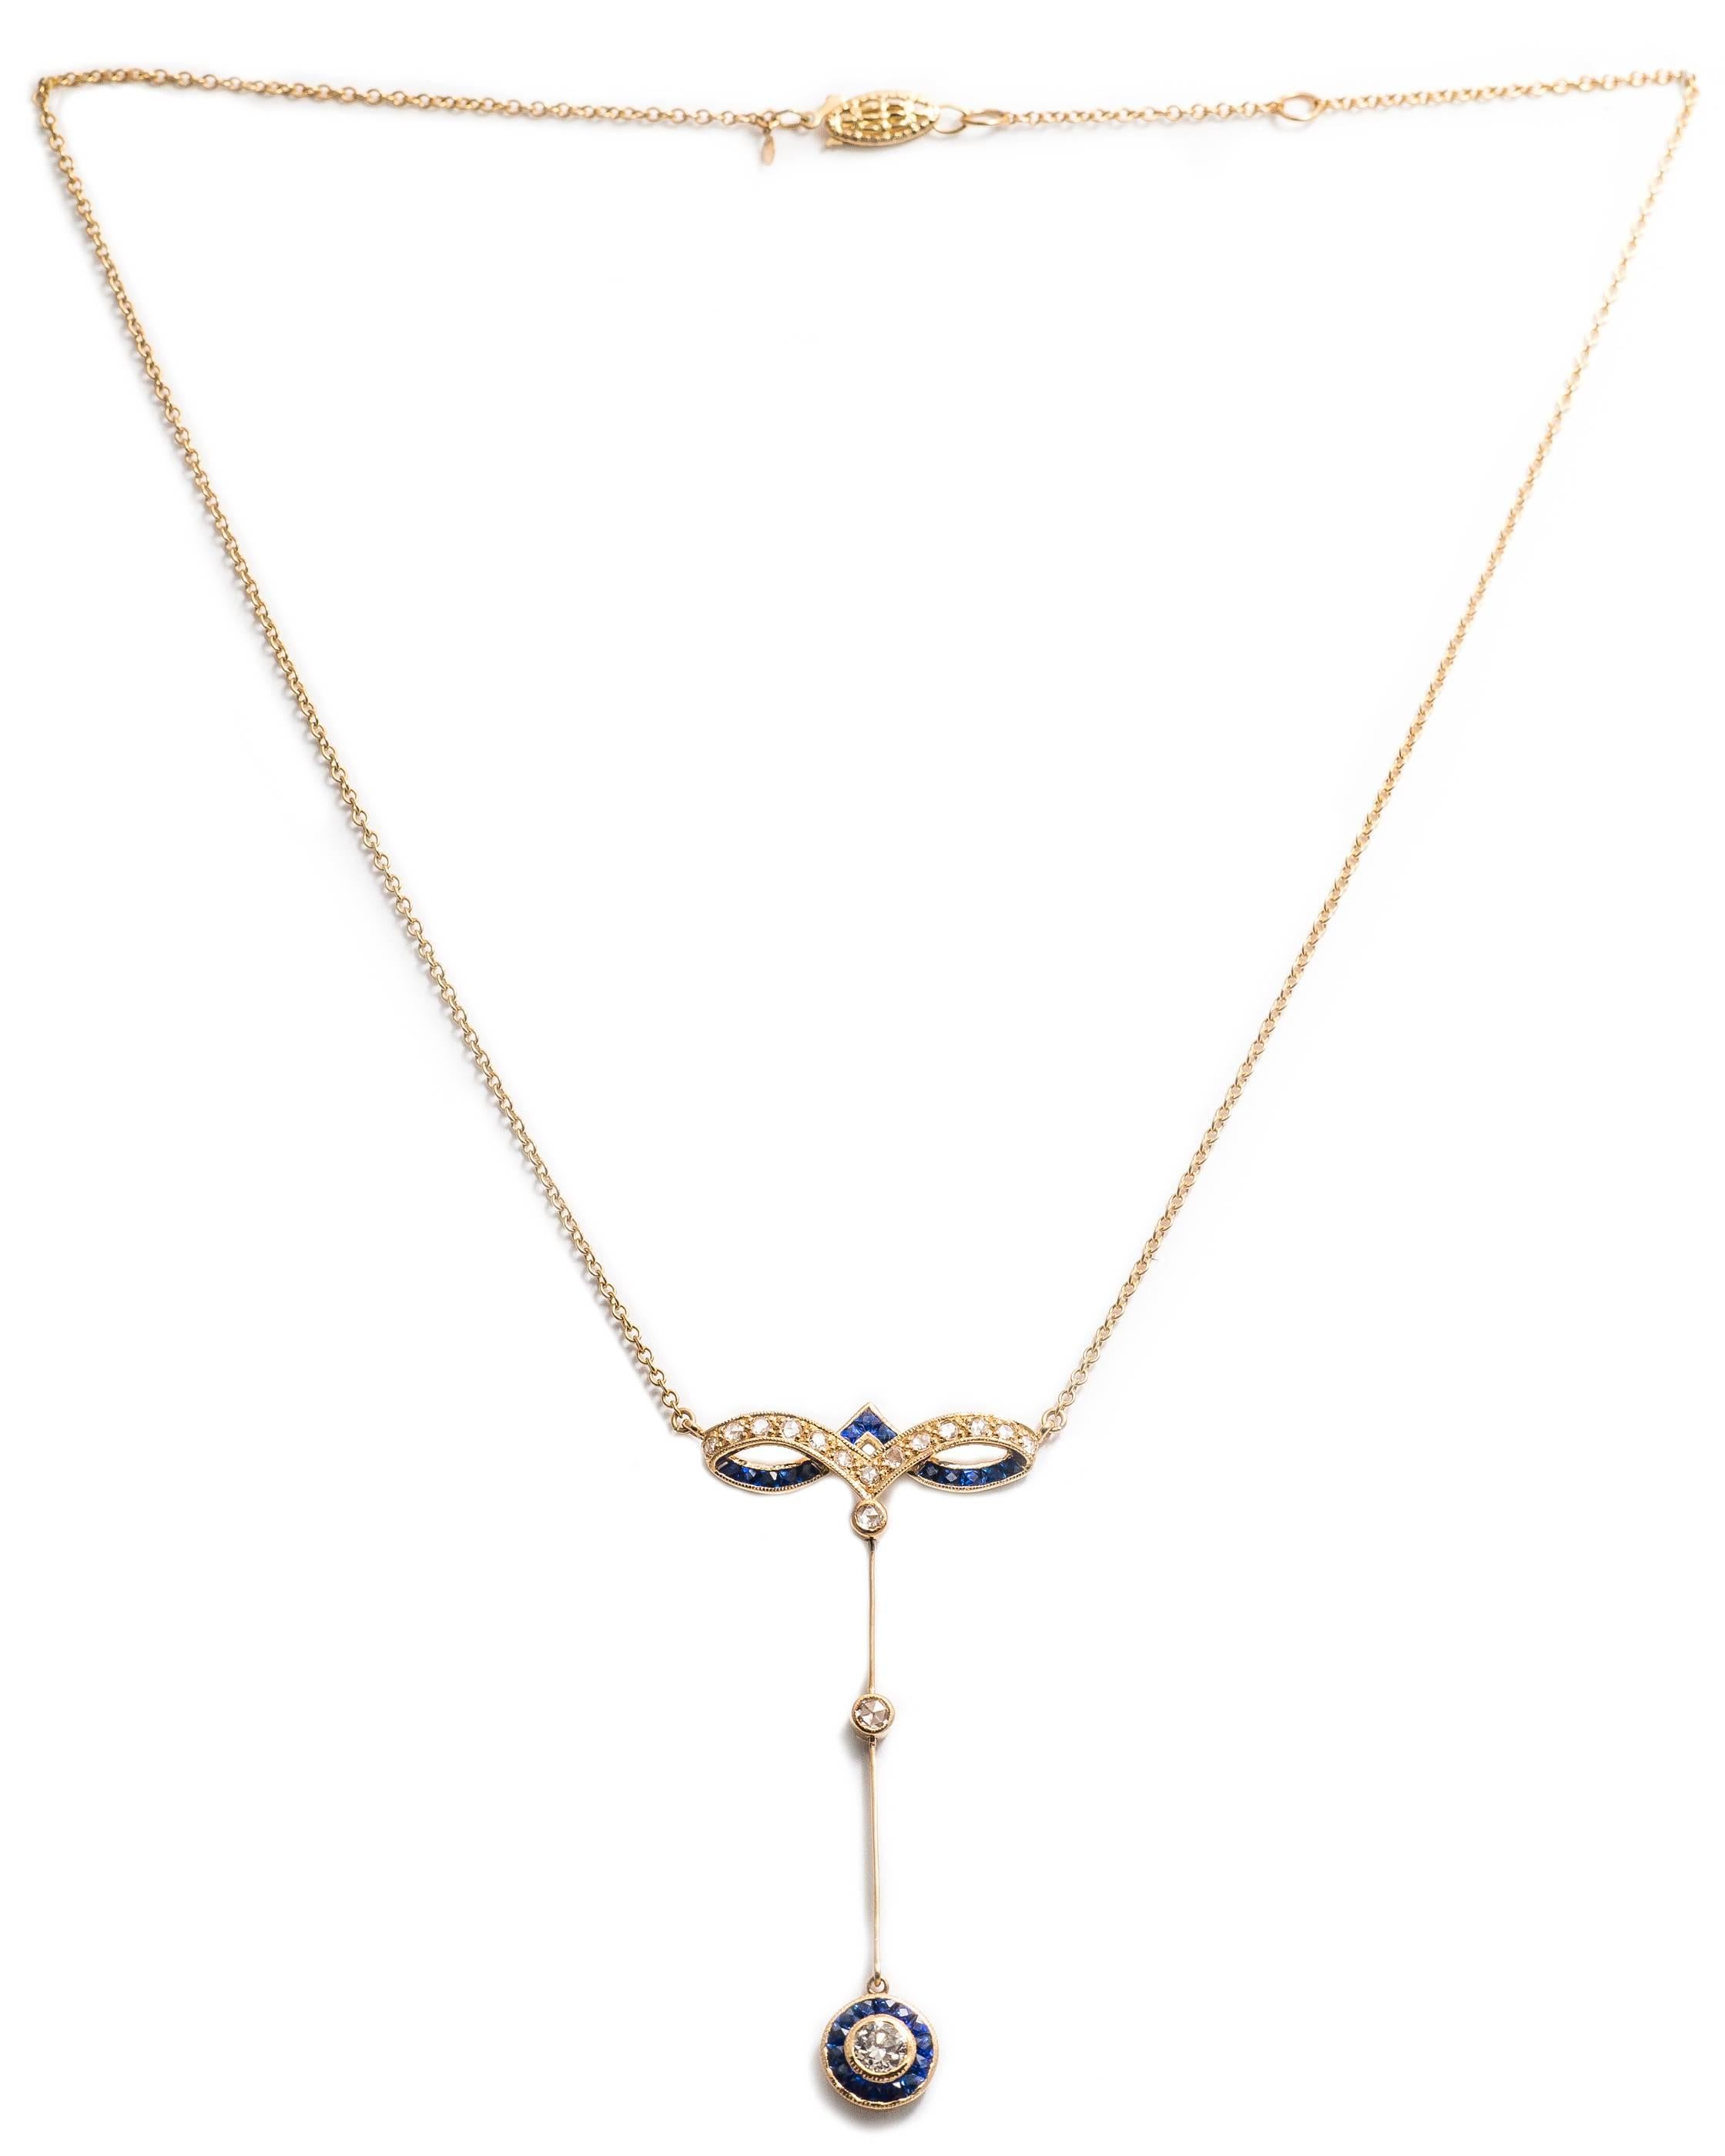 A beautiful yellow gold, sapphire and diamond necklace.  Featuring pave set rose cut and a bezel set European cut diamonds, this necklace also features beautiful rich vivid French cut blue sapphires.

Grading as beautiful VS clarity and H color, the